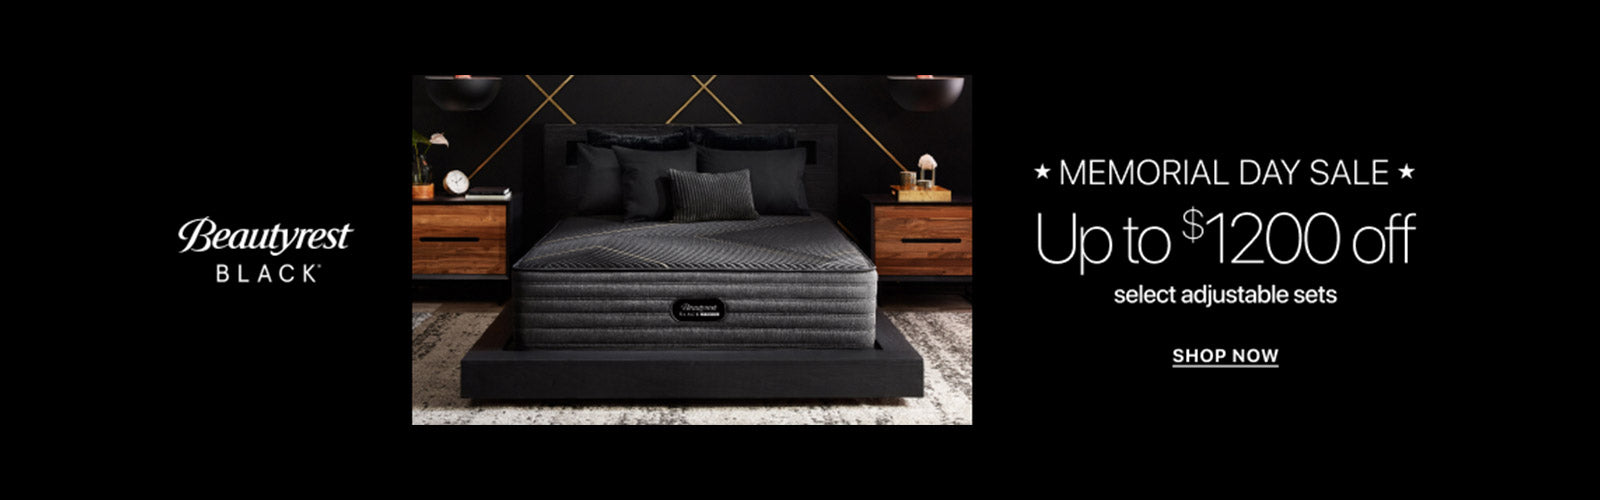 Beautyrest Black Memorial Day Sale Save up to $1,200 on select adjustable mattress sets